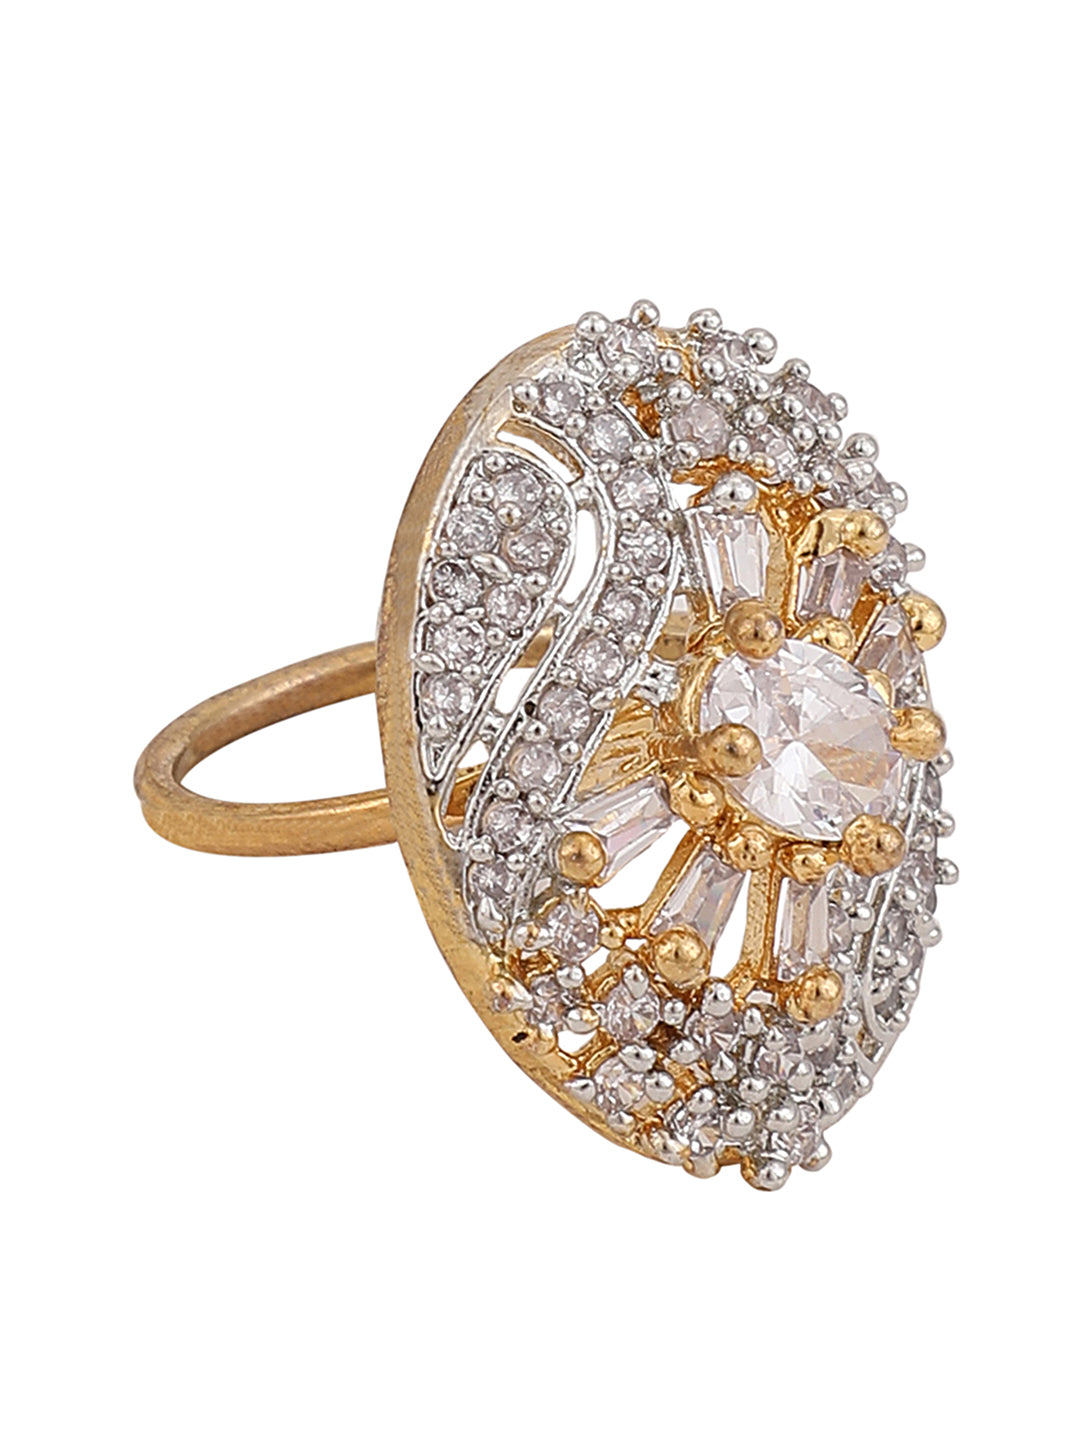 Women's Oval Shape Gold Plated White Cz Stone Studded Cocktail Ring - Anikas Creation